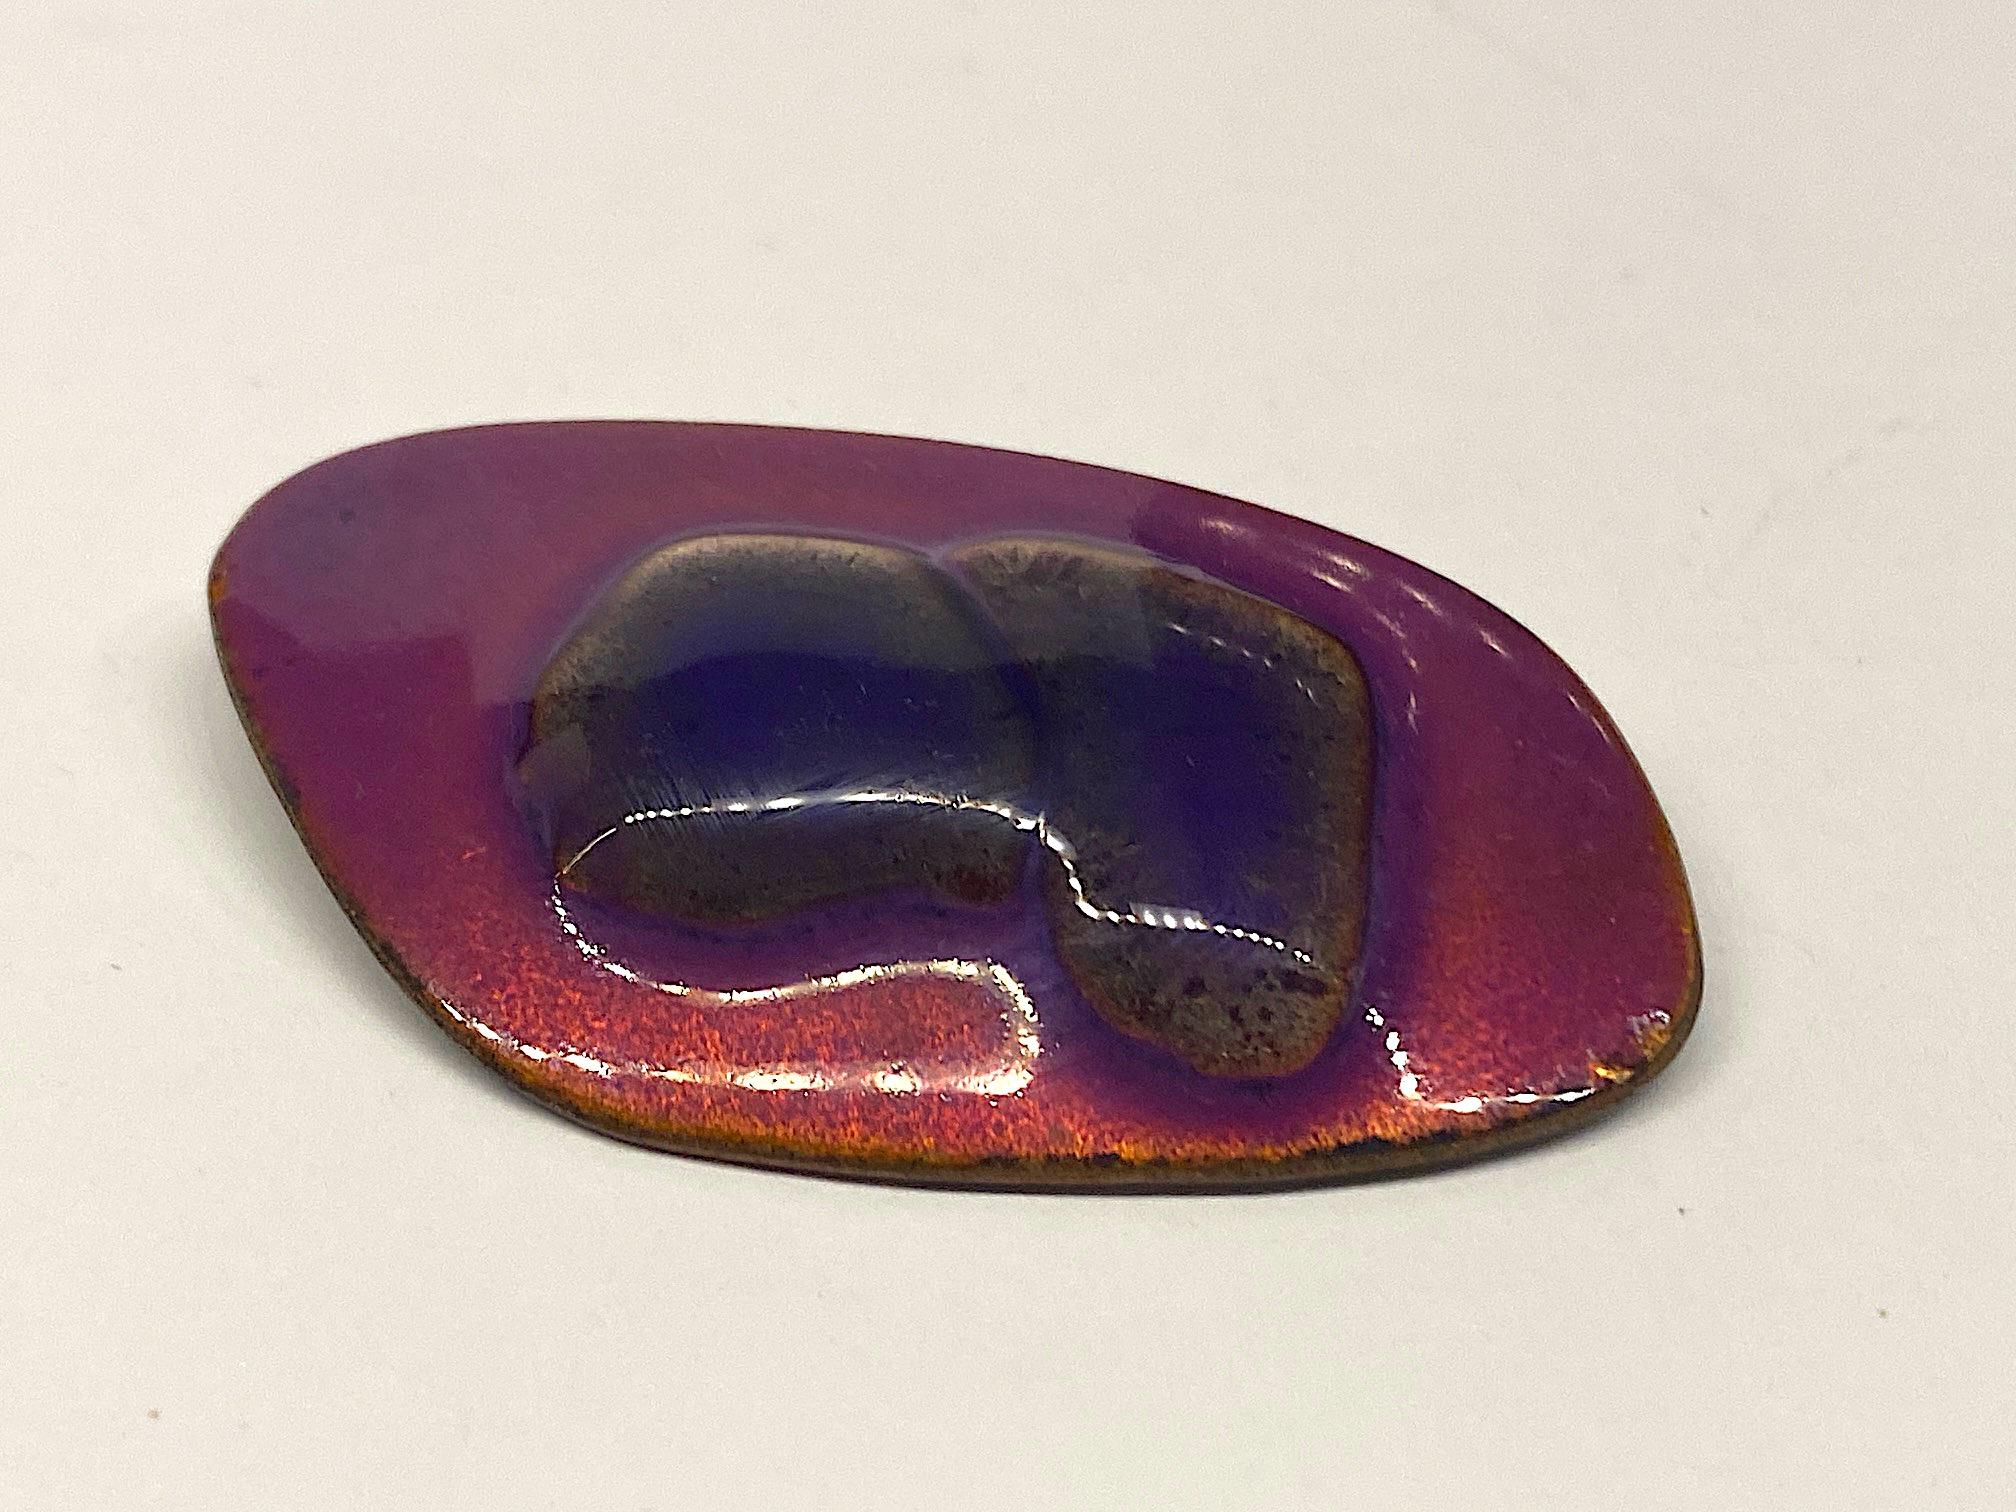 A lovely and colorful two tone purple enamel brooch from the 1960s by Kay Denning. The brooch is an asymmetric in shape and measures 2.5 inches ling and 1.38 inches tall. The enameling involves the use of heating the dark purple glass bits on the